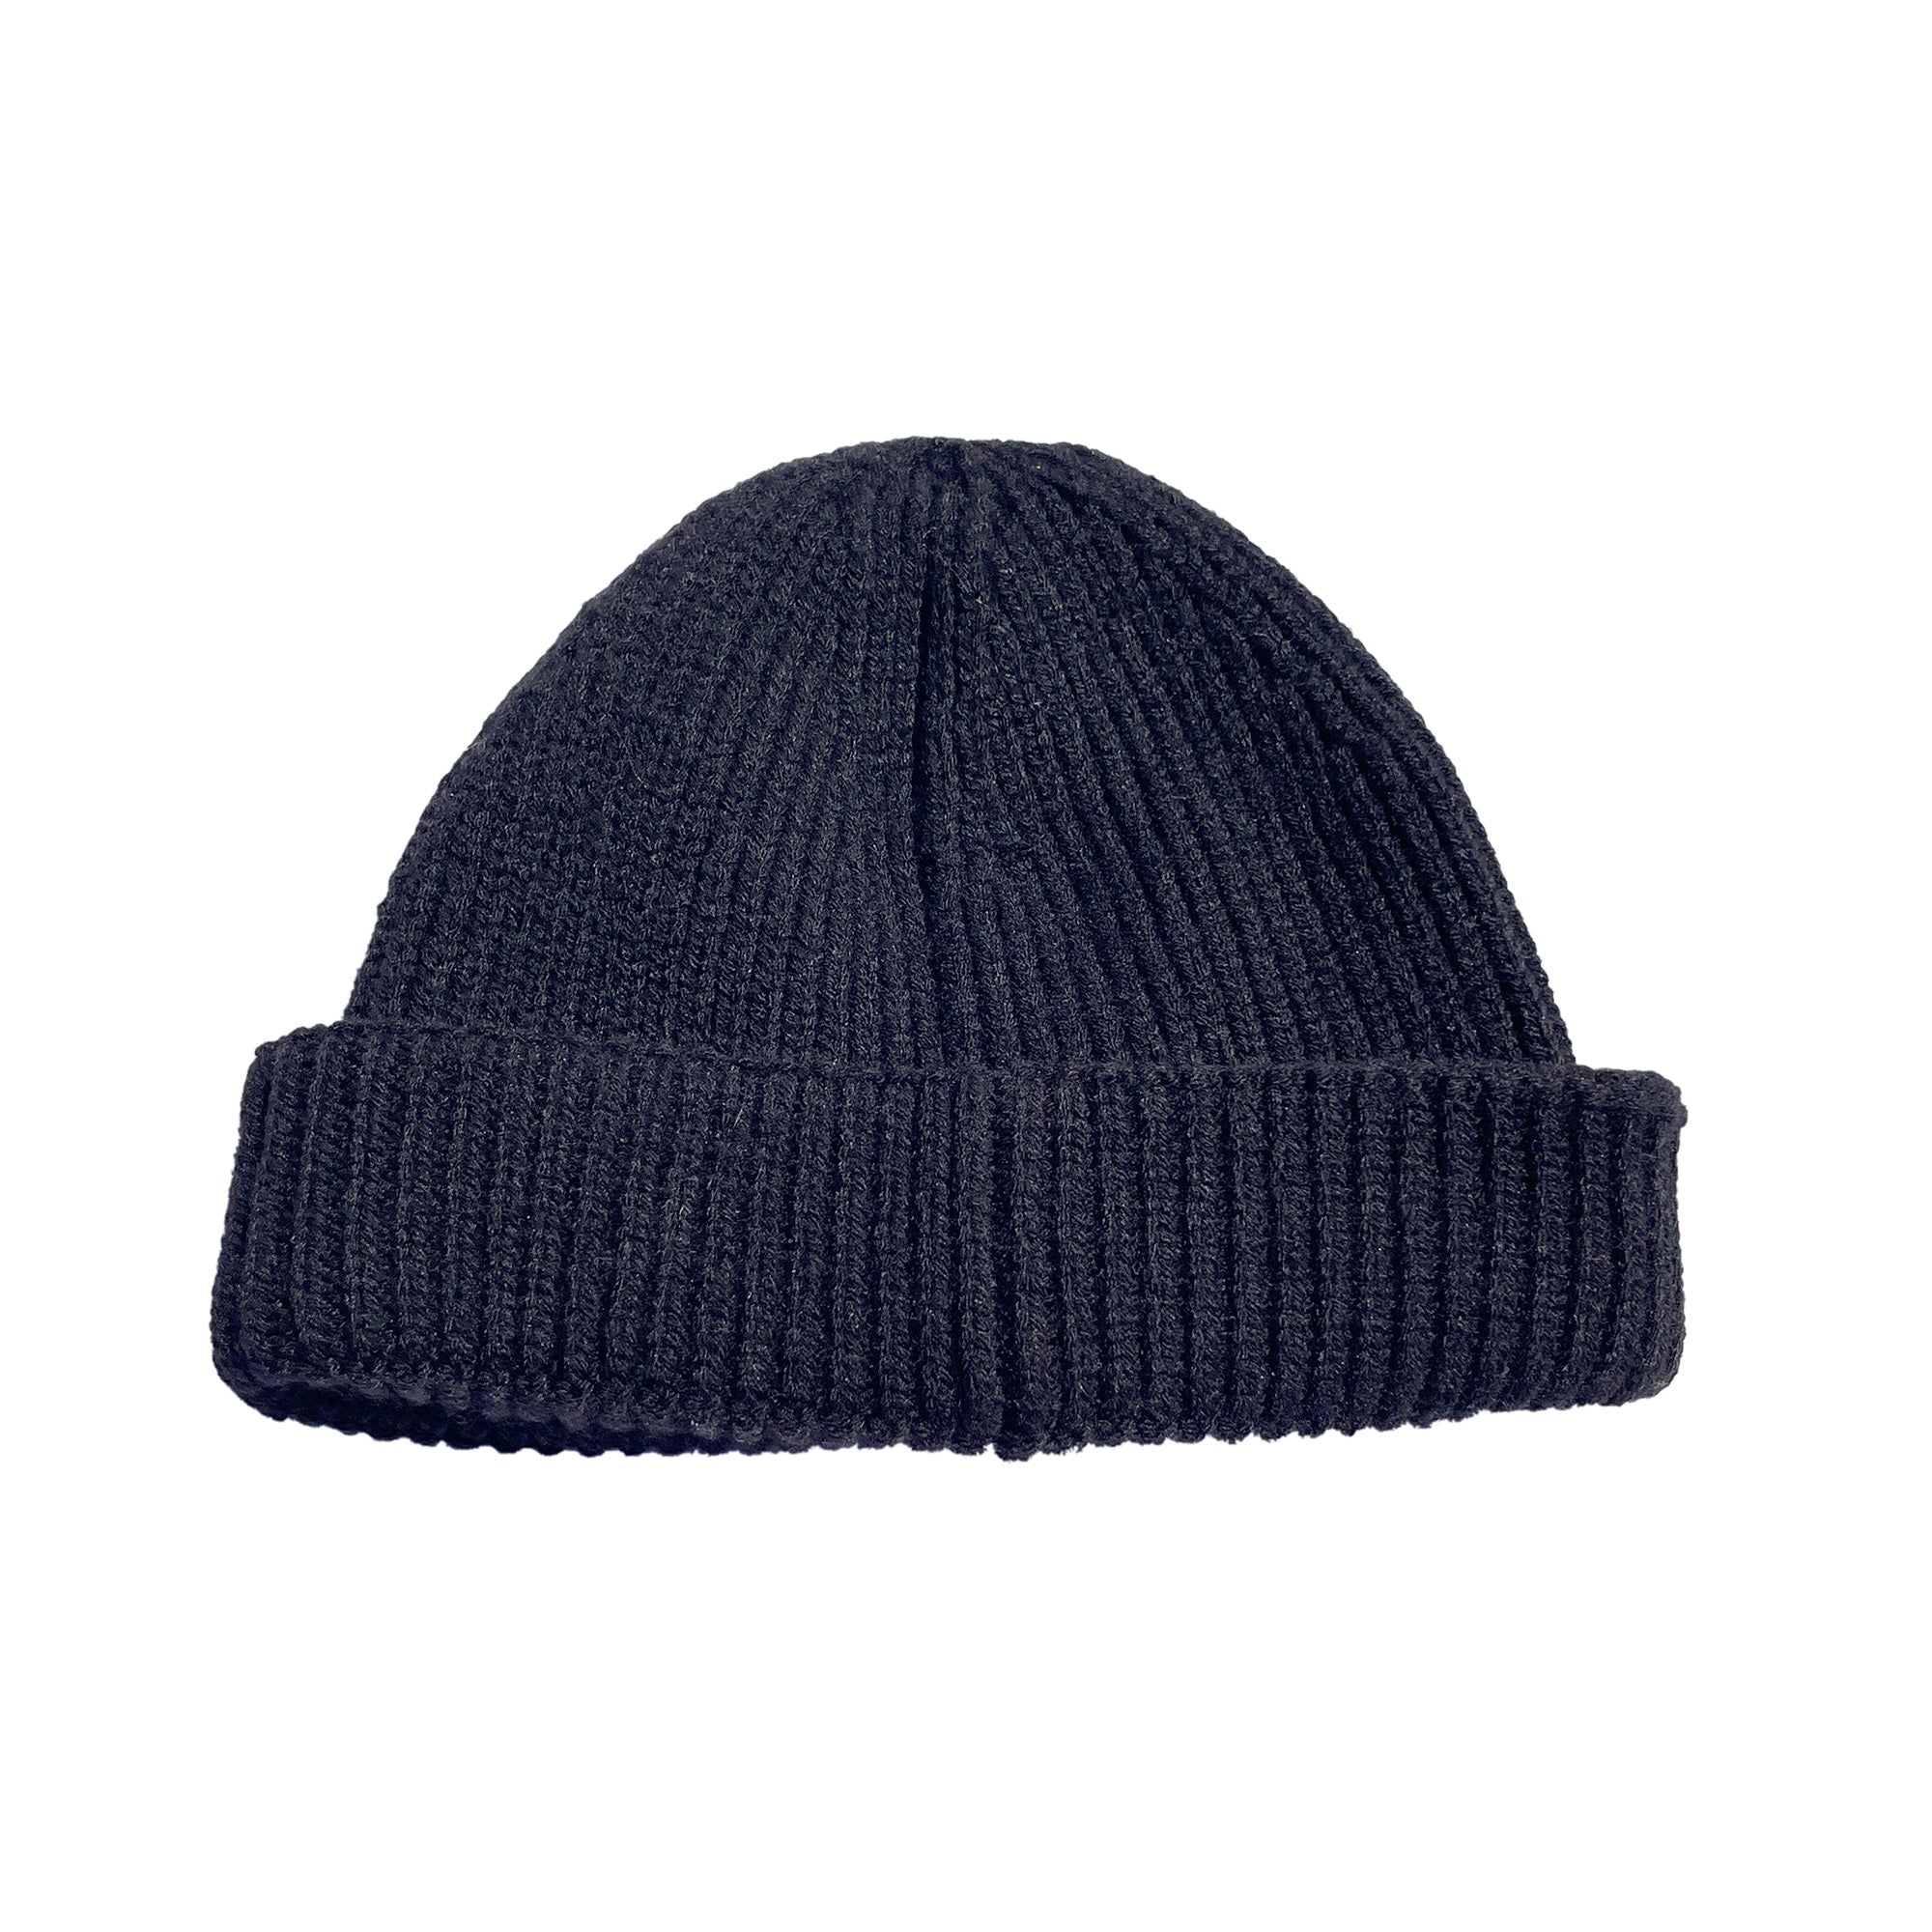 SS20 Stoned Fish Recycled Harbour Beanie - Black – weareSS20